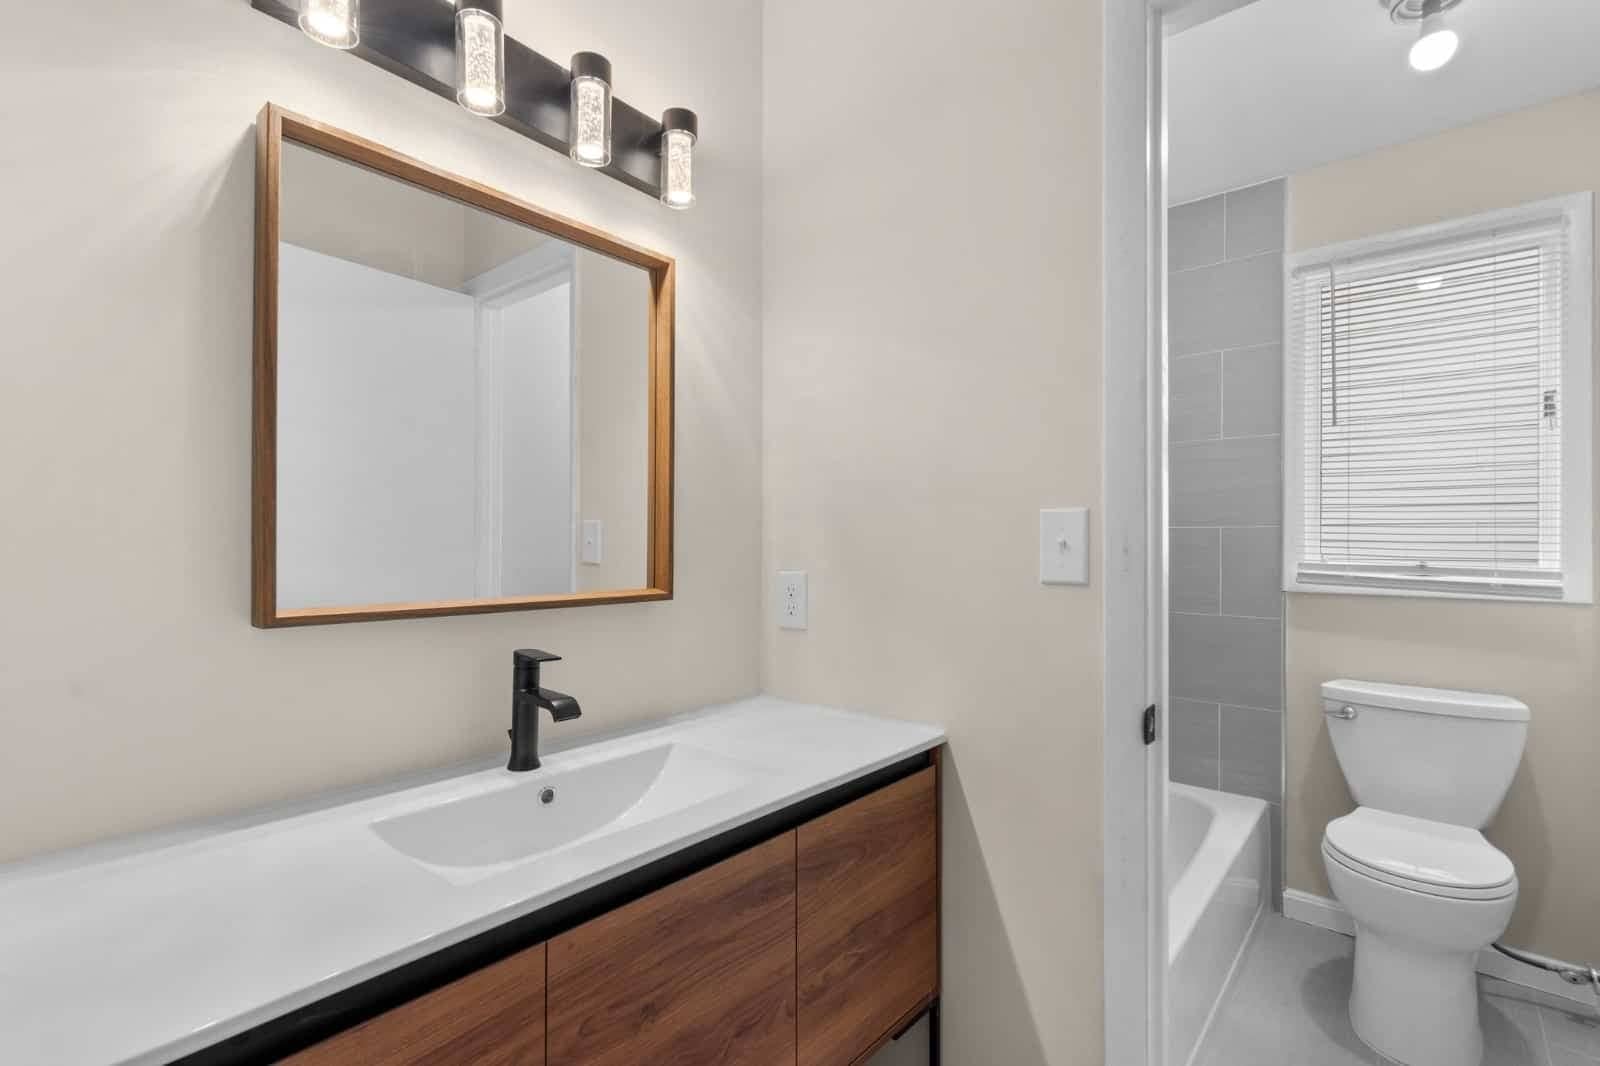 Sink & Toilets from Bathroom remodeling project